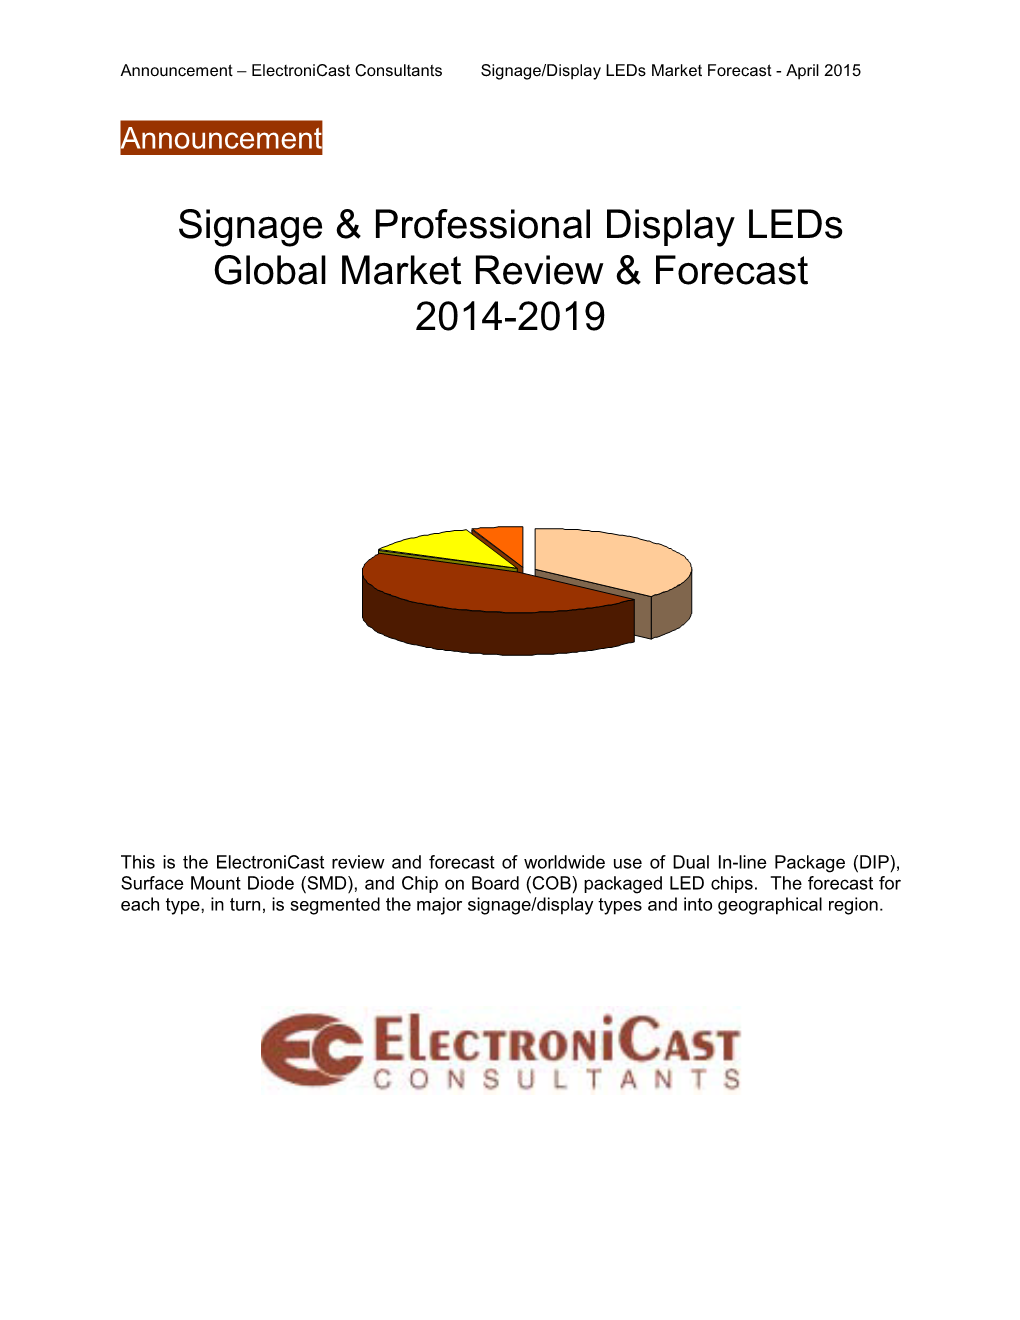 Leds in Signage and Professional Displays